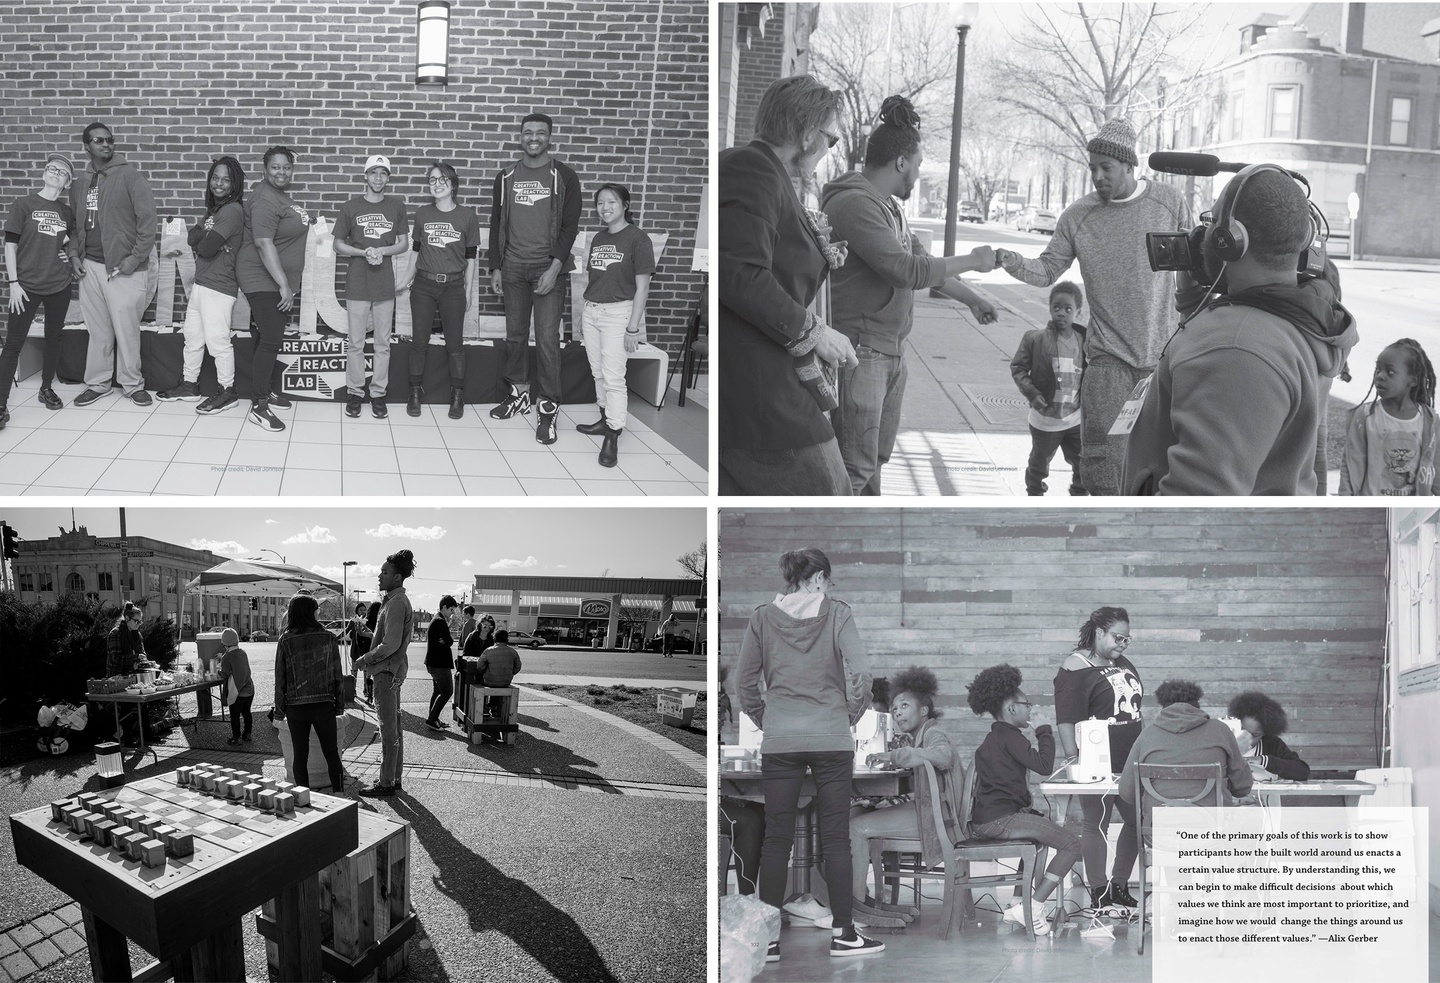 Collage of four photos showing a group of people posing together, on-site in two areas of the community, and sitting at tables working collaboratively.